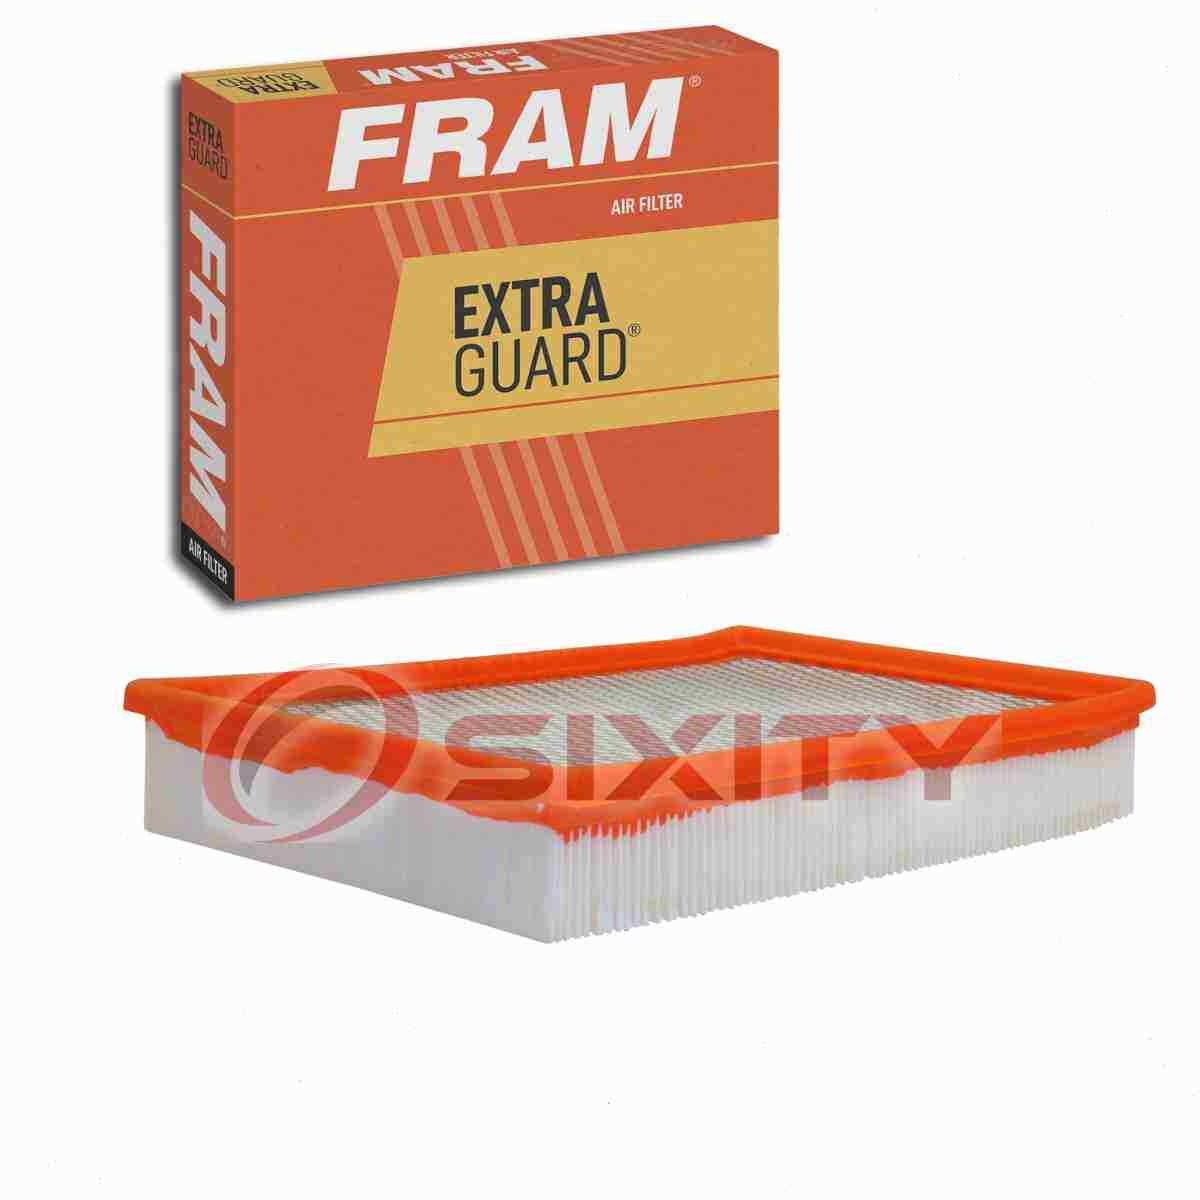 FRAM Extra Guard Air Filter for 1986-2011 Lincoln Town Car Intake Inlet zs